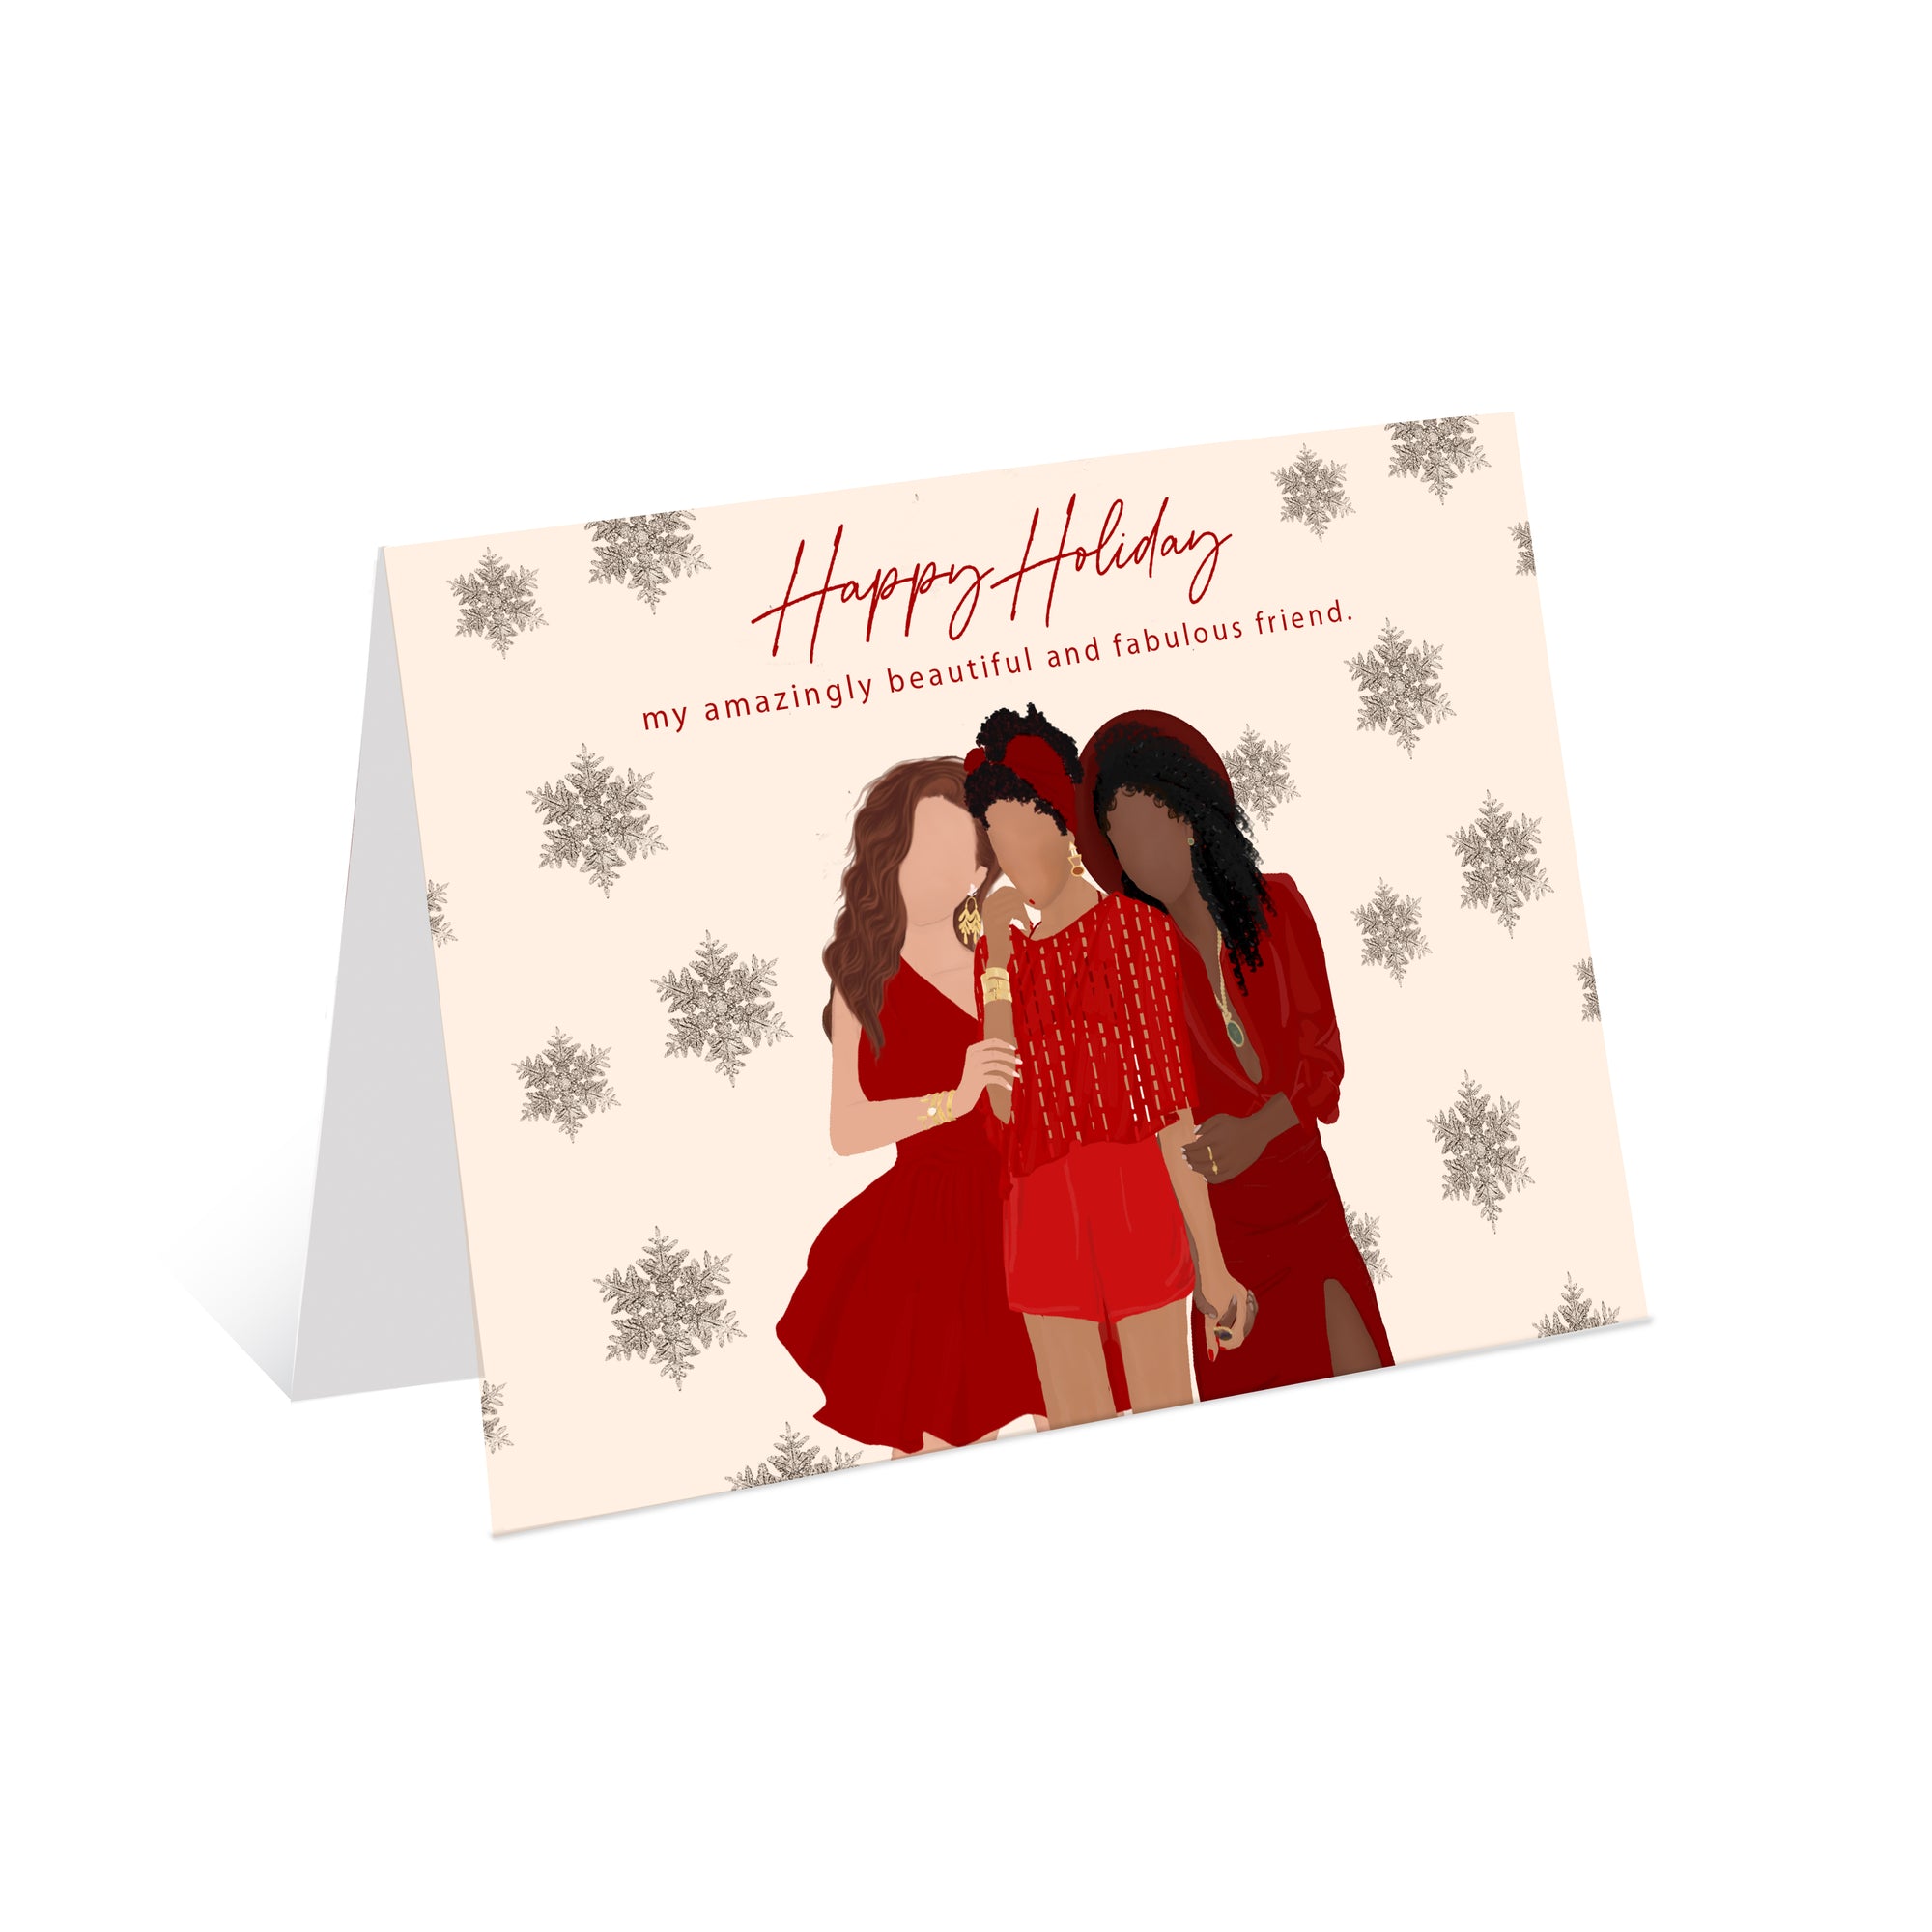 Happy Holiday Friend - Greeting Card